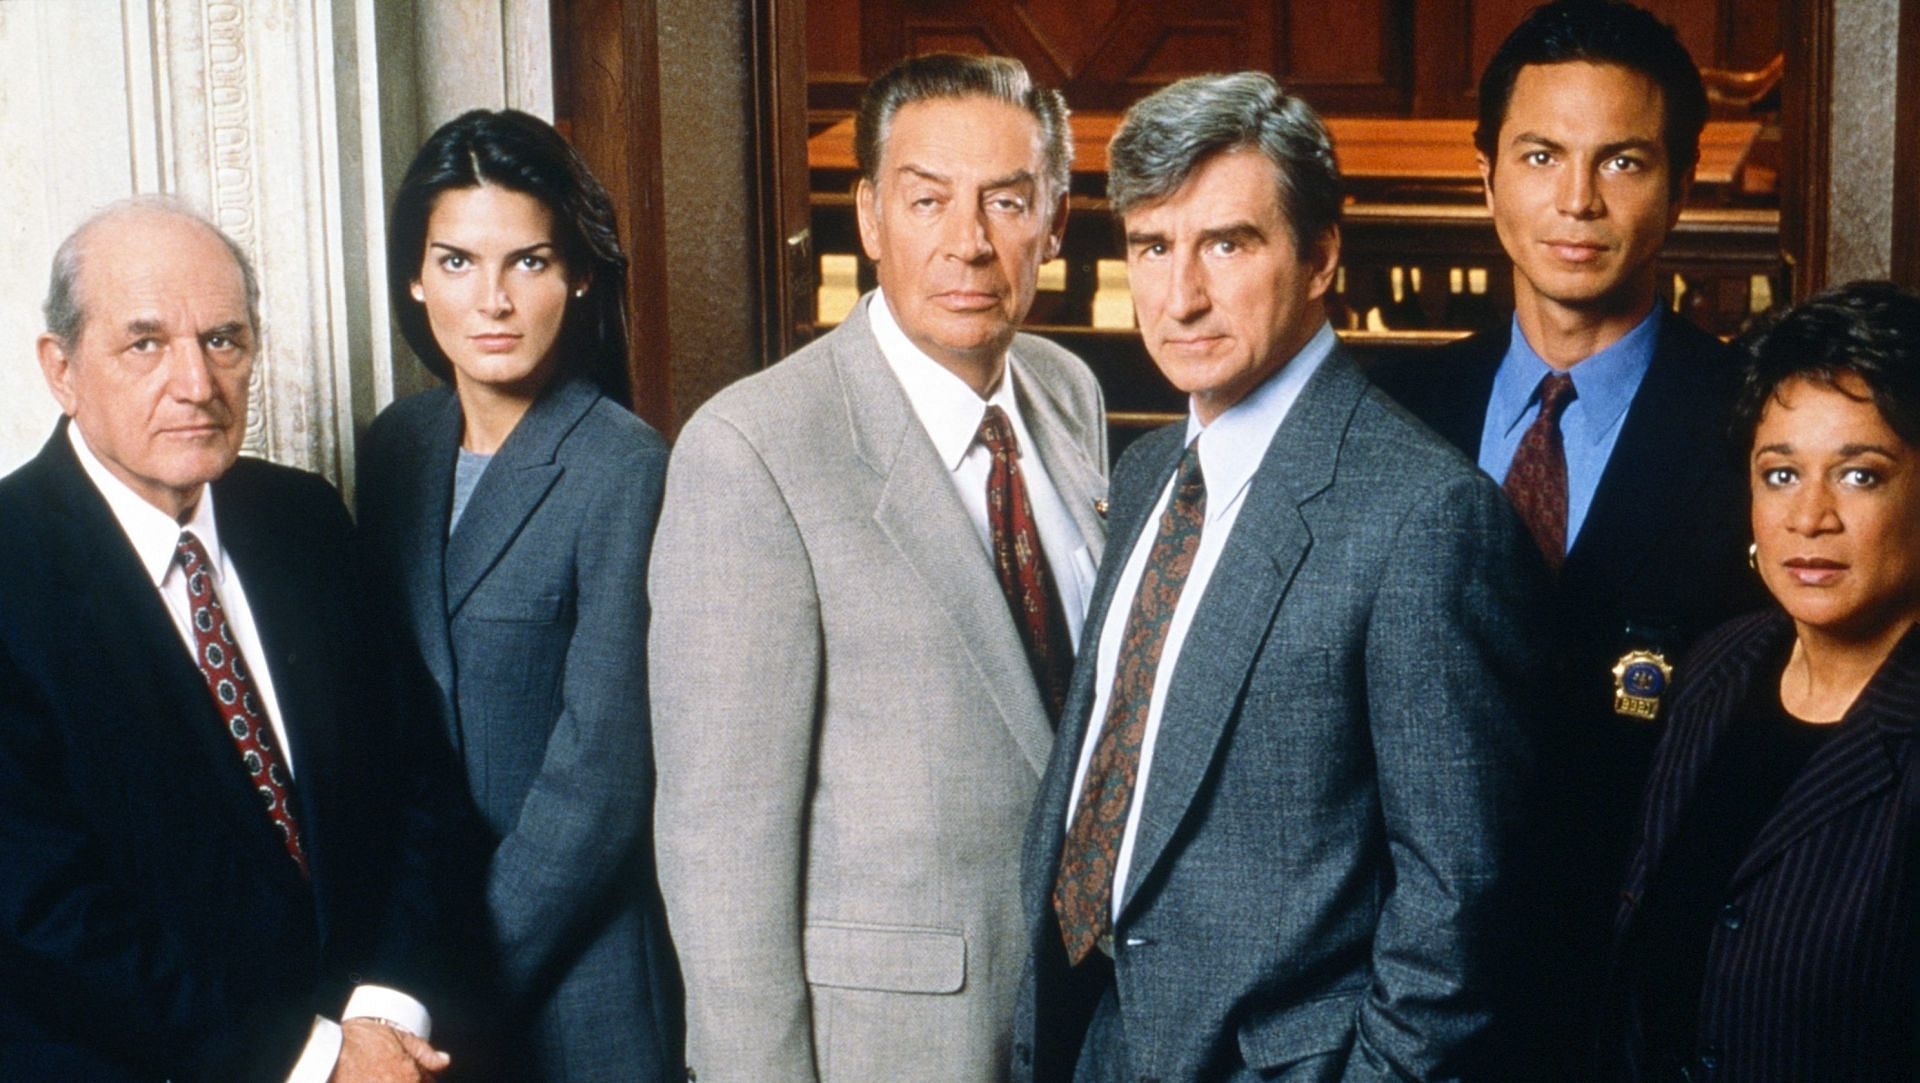 The cast of Law and Order (Image via NBC)